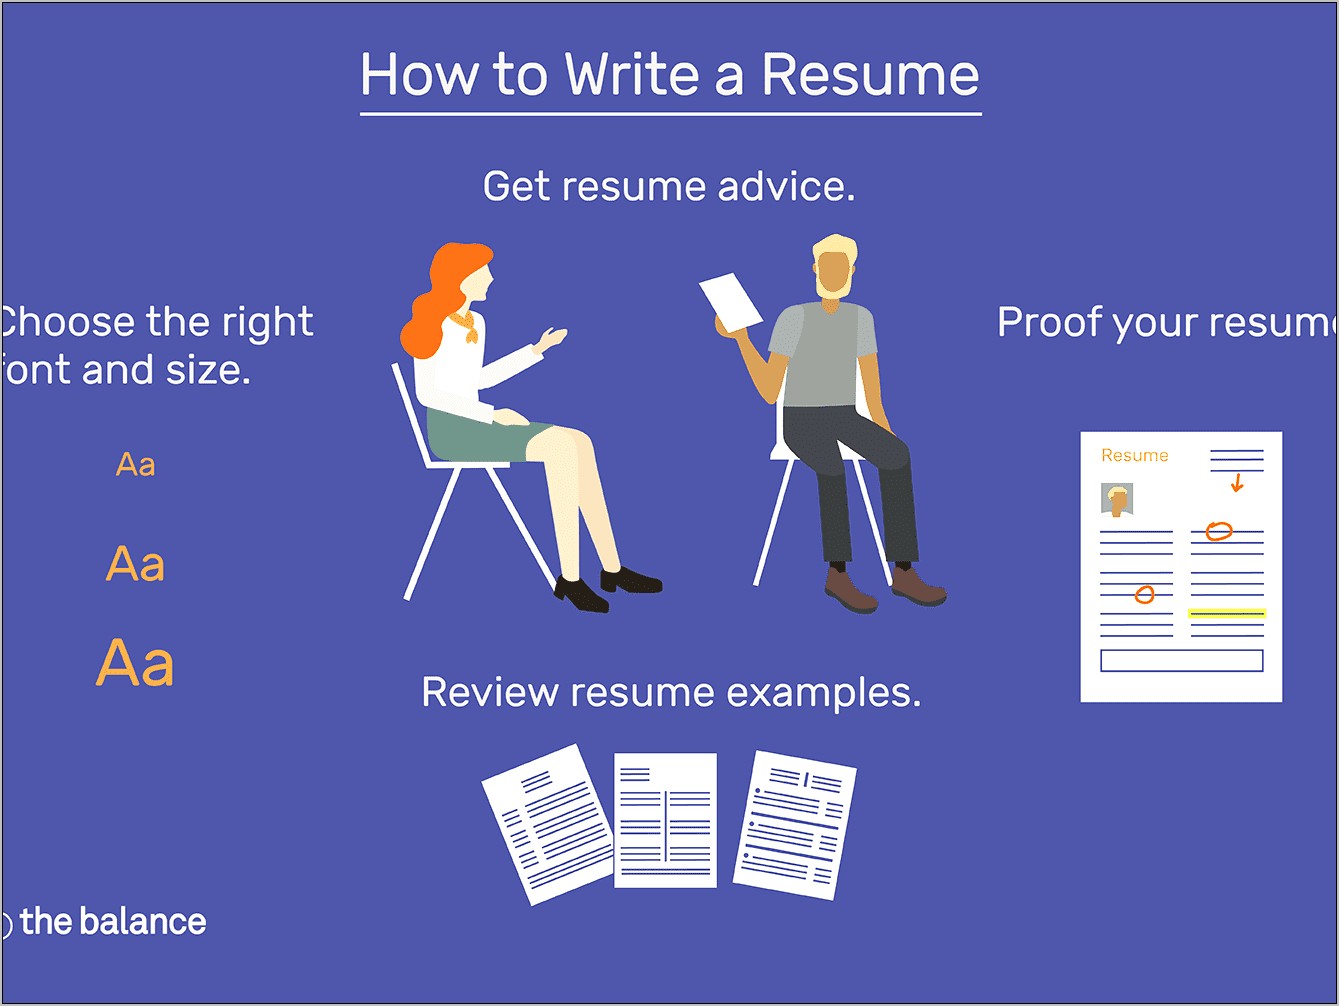 Best Way To Forward A Resume